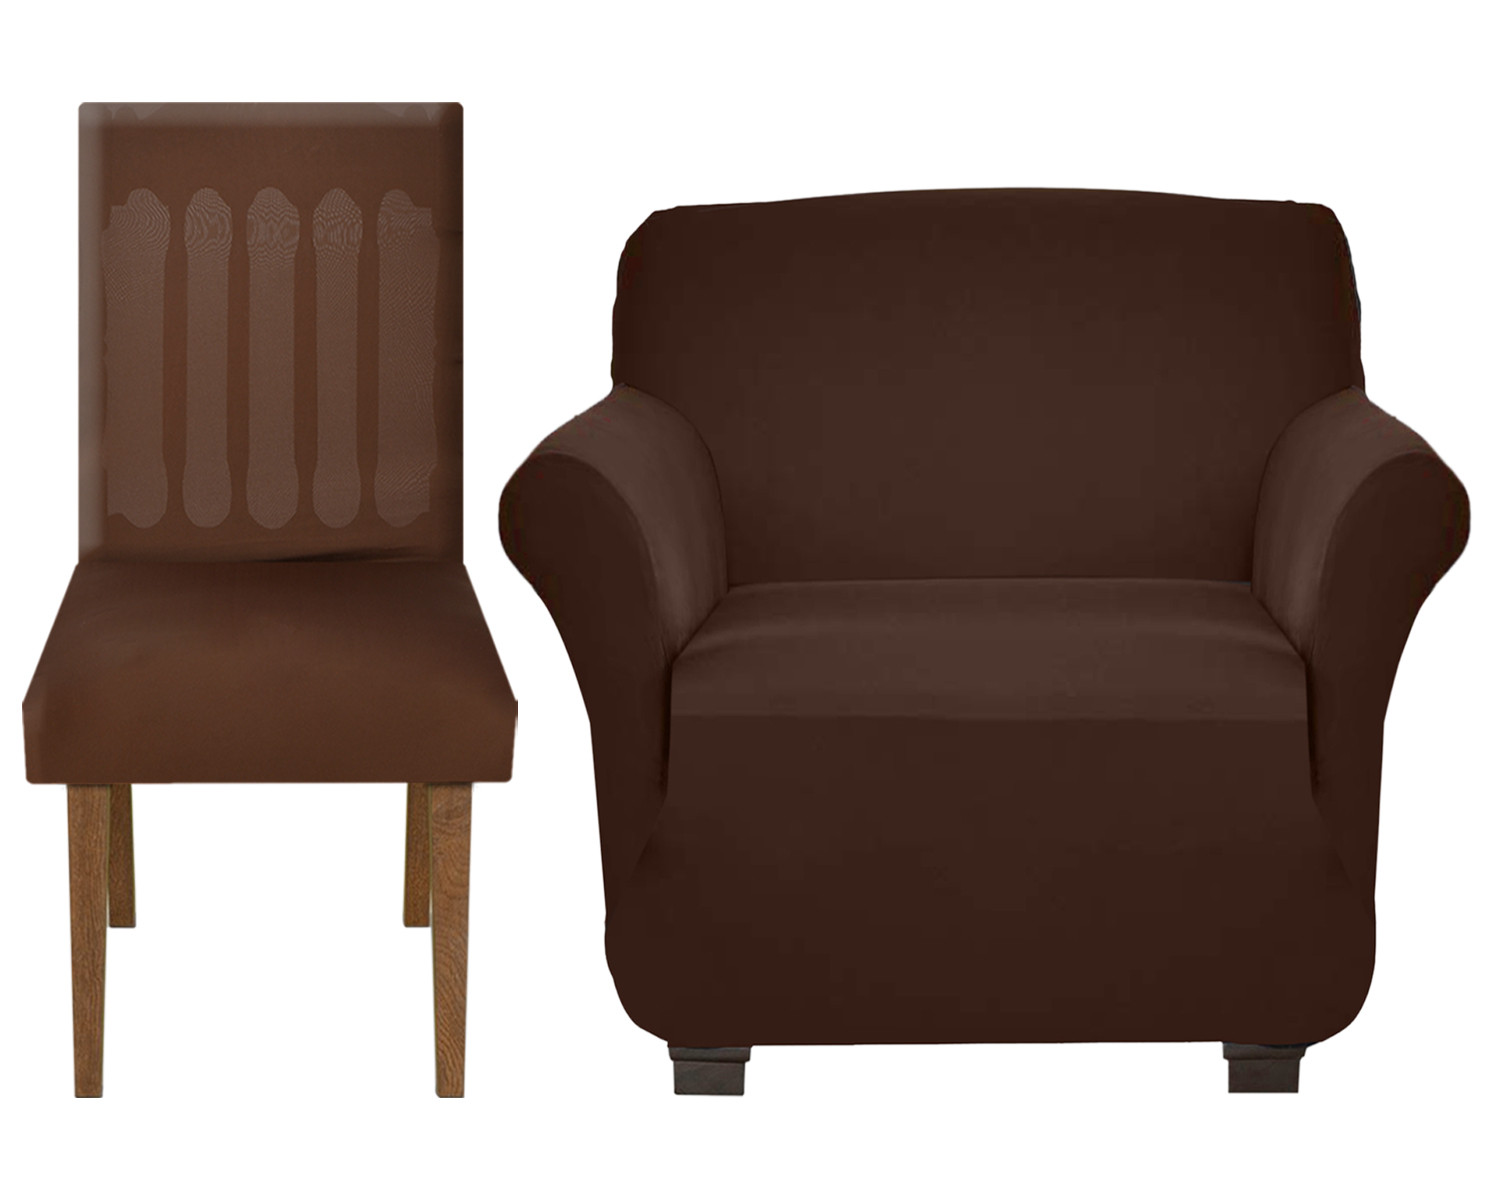 Kuber Industries Stretchable, Non-Slip Polyster 1 Seater Sofa & Chair Cover Set, Set of 2 (Brown)